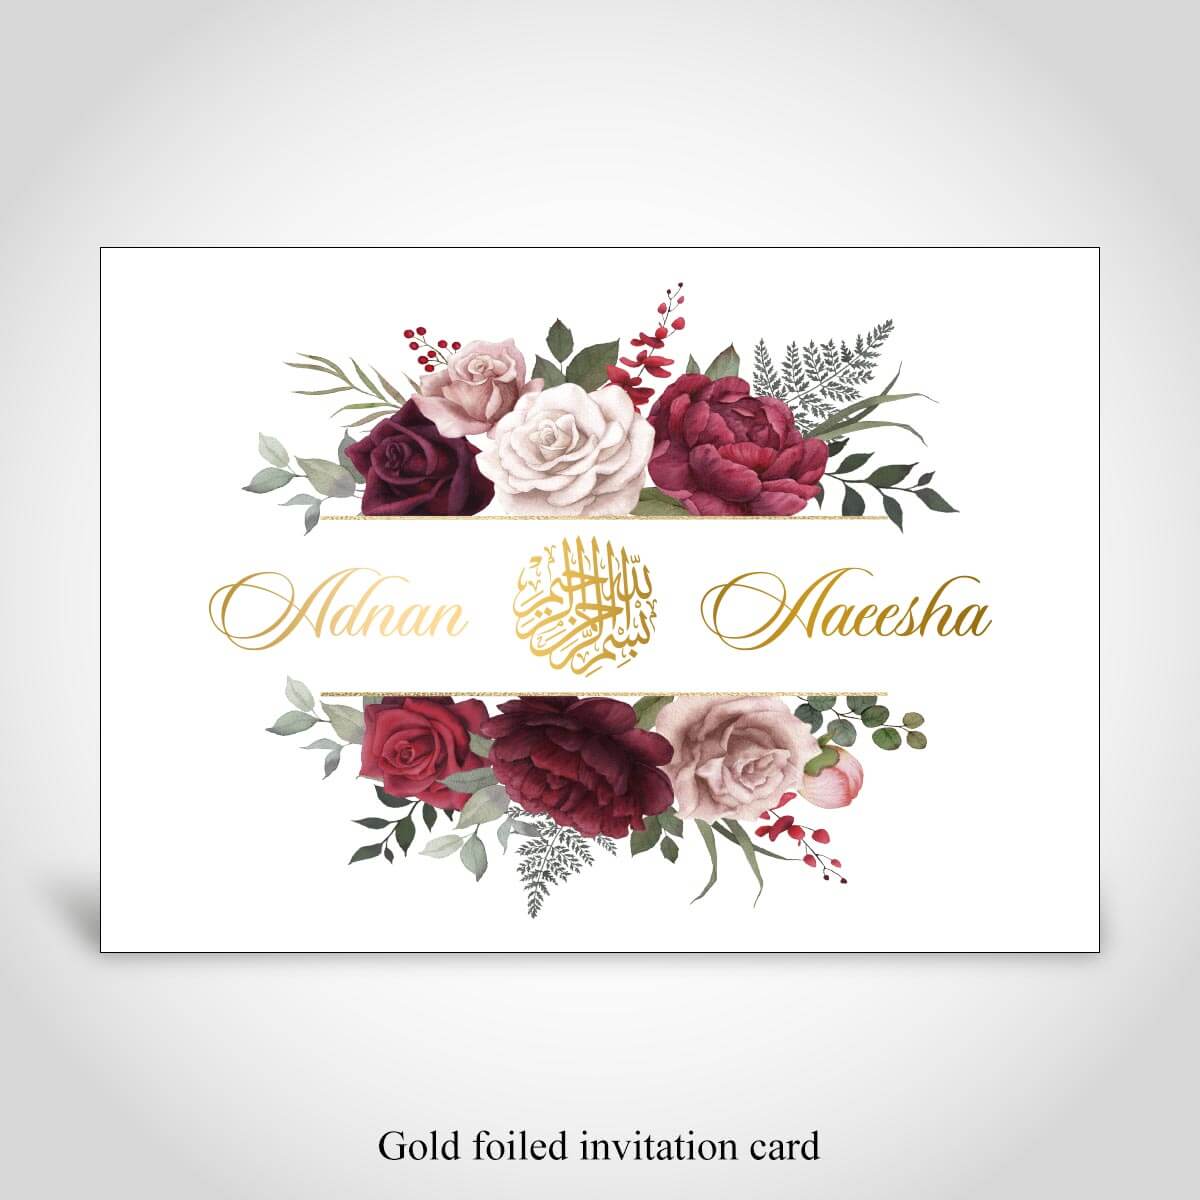 Showcase Popular Design Motifs And Symbols Used In Indian Wedding Invitations CardFusion